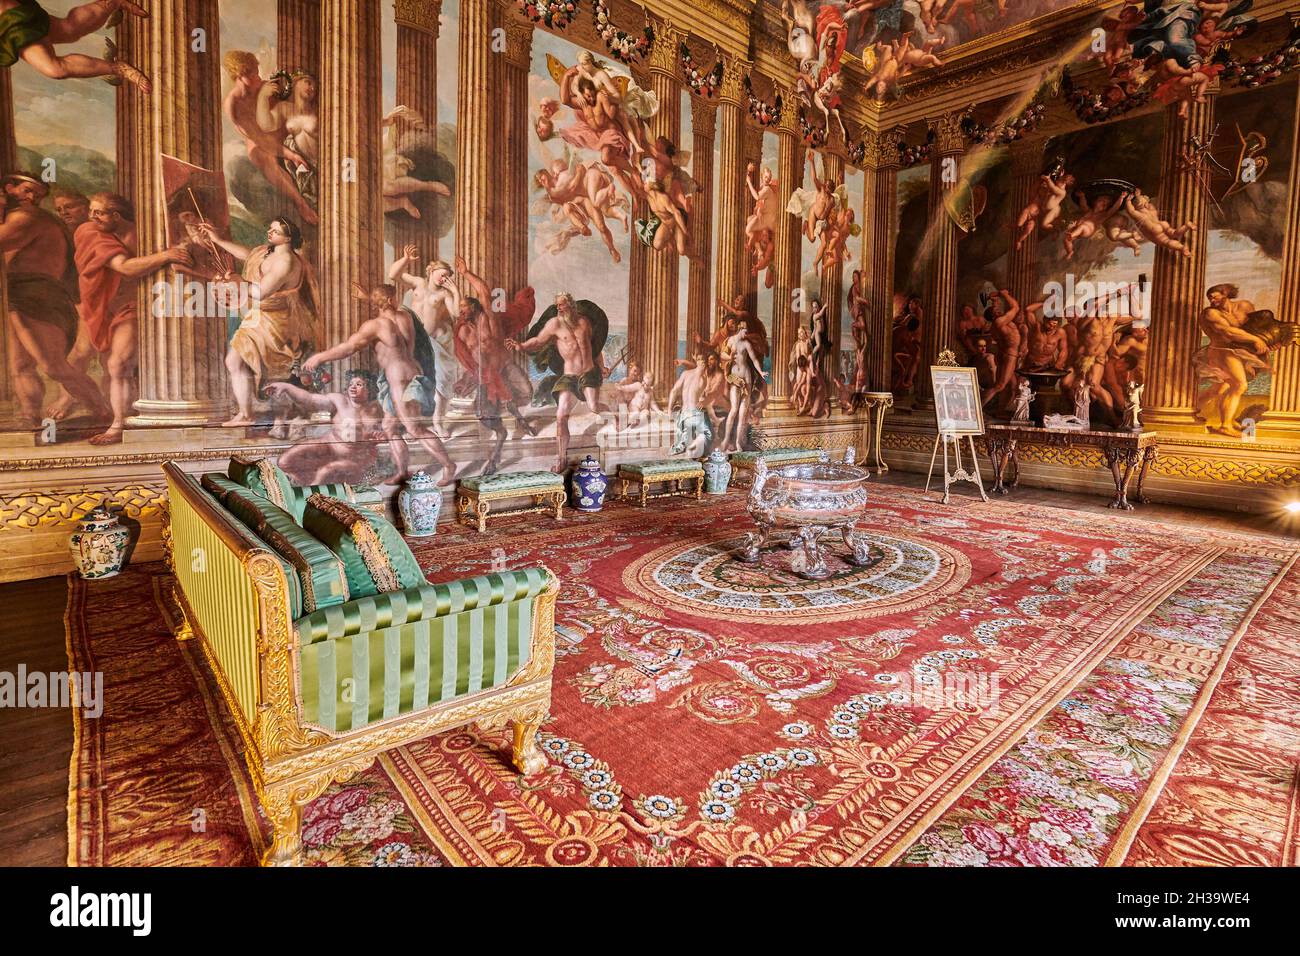 Paintings by Verrio in the Heaven room at Burghley House, an elizabethan mansion built by William Cecil, Lord Burghley, at Stamford in 16 century Engl Stock Photo